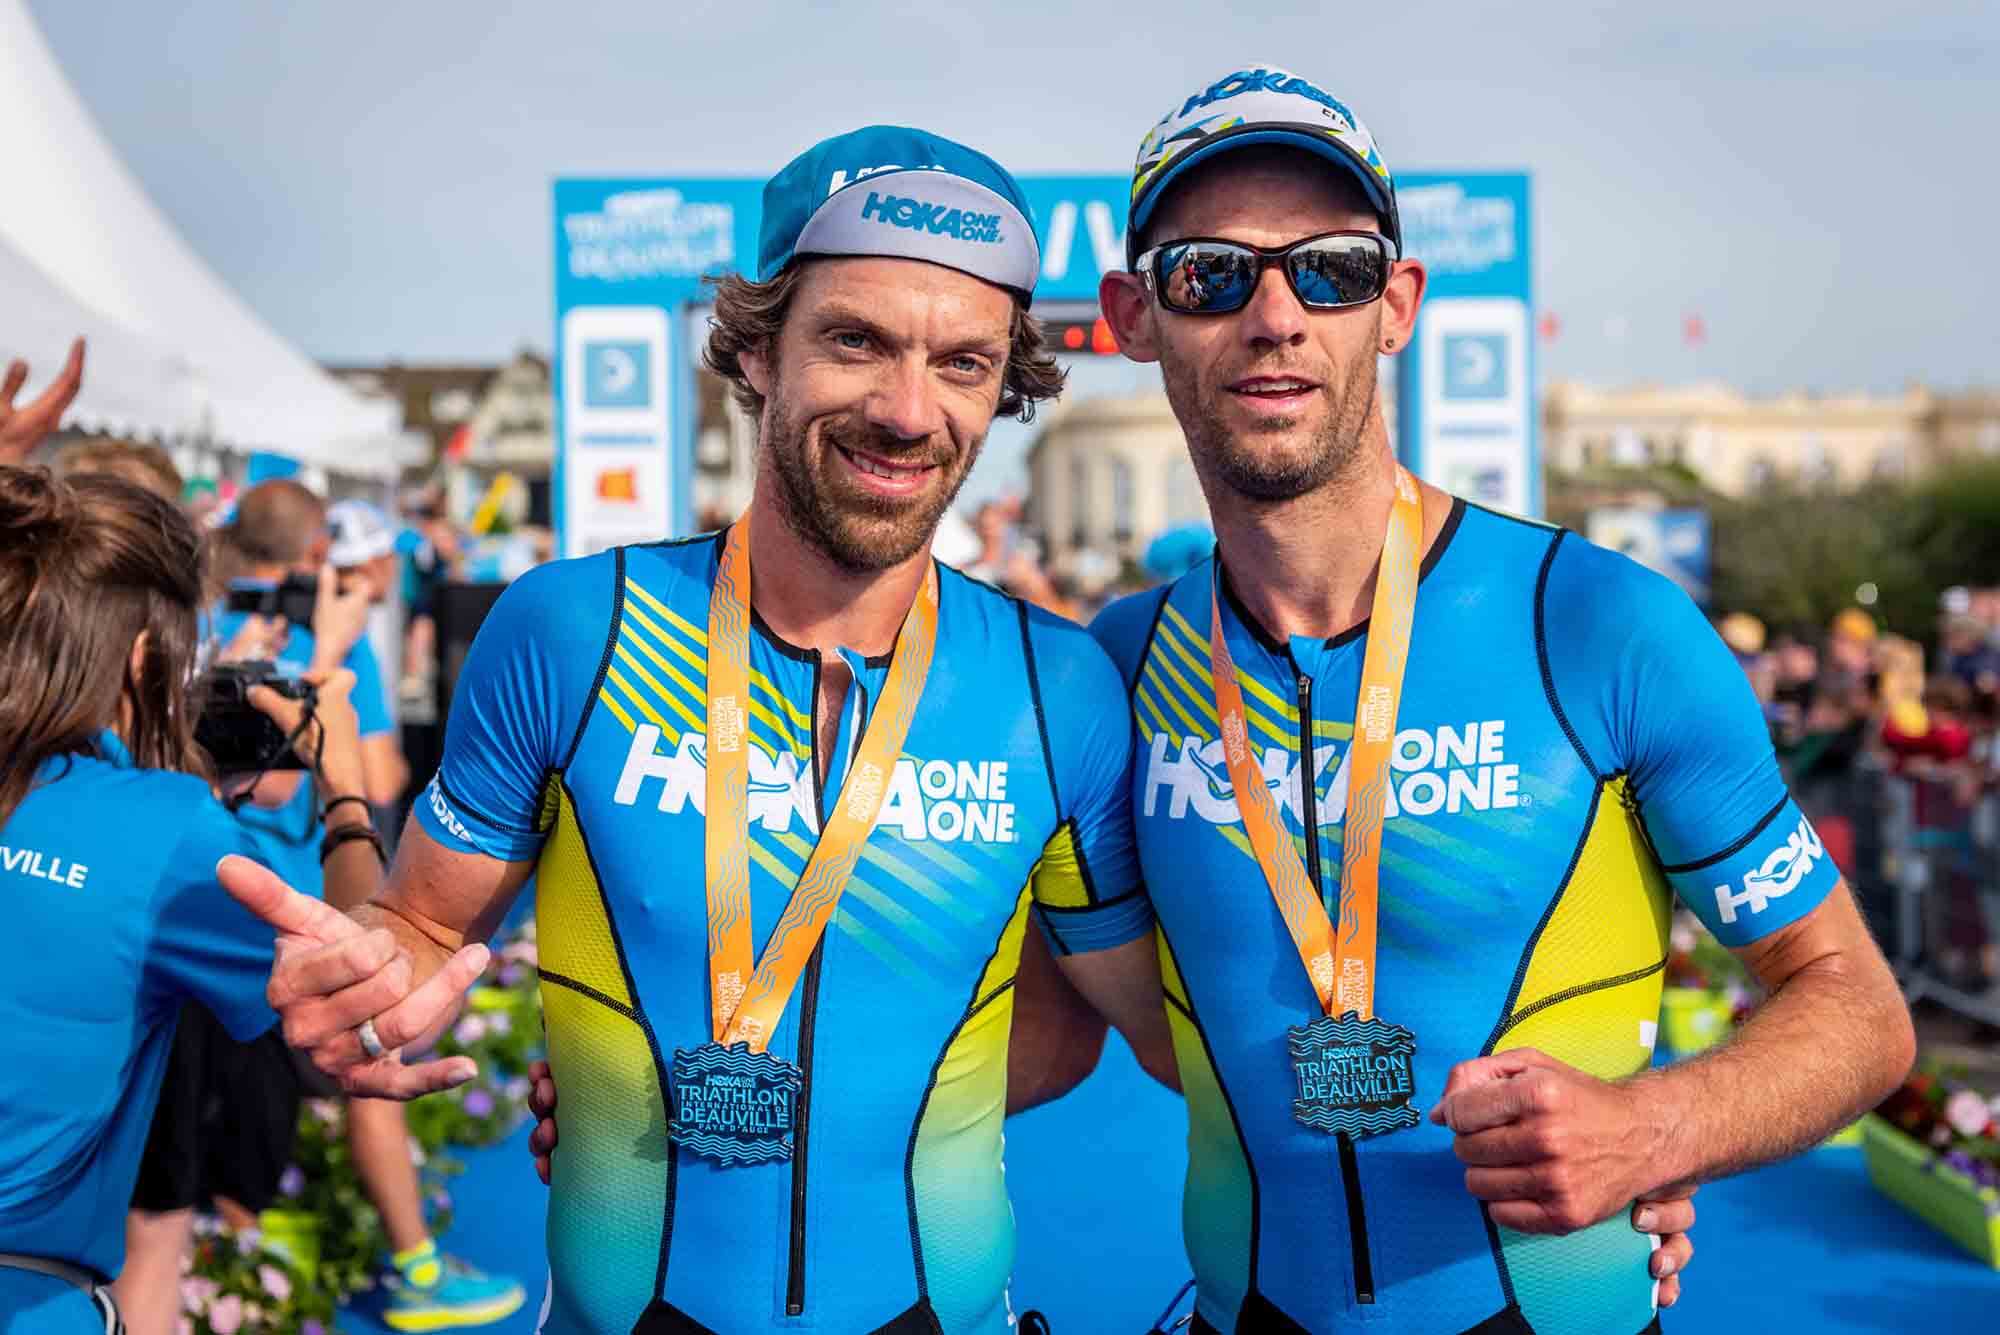 HOKA athletes Olivier Lyoen and Antoine Perel after their victory at 2018 Deauville Triathlon